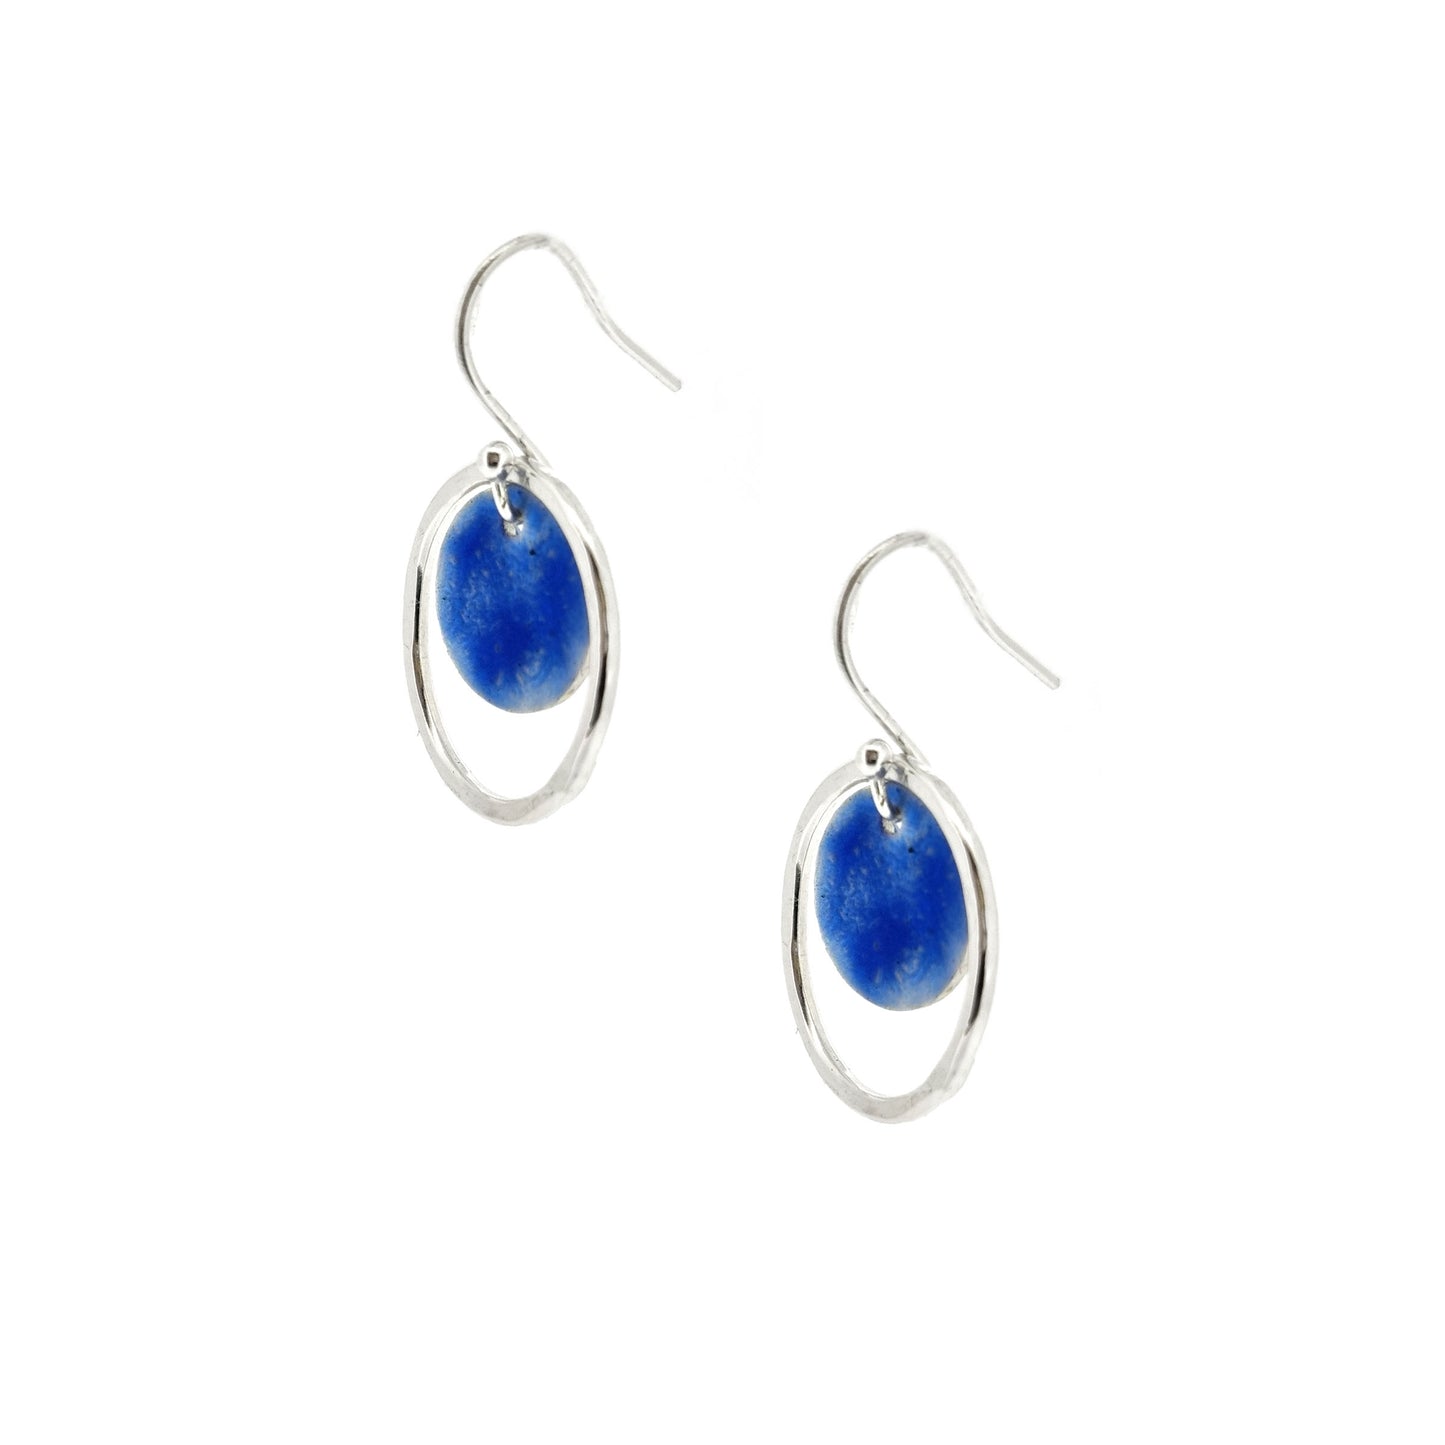 Silver drop earrings with a central disc featuring patterned dark blue enamel surrounded by a silver hammered open circle.